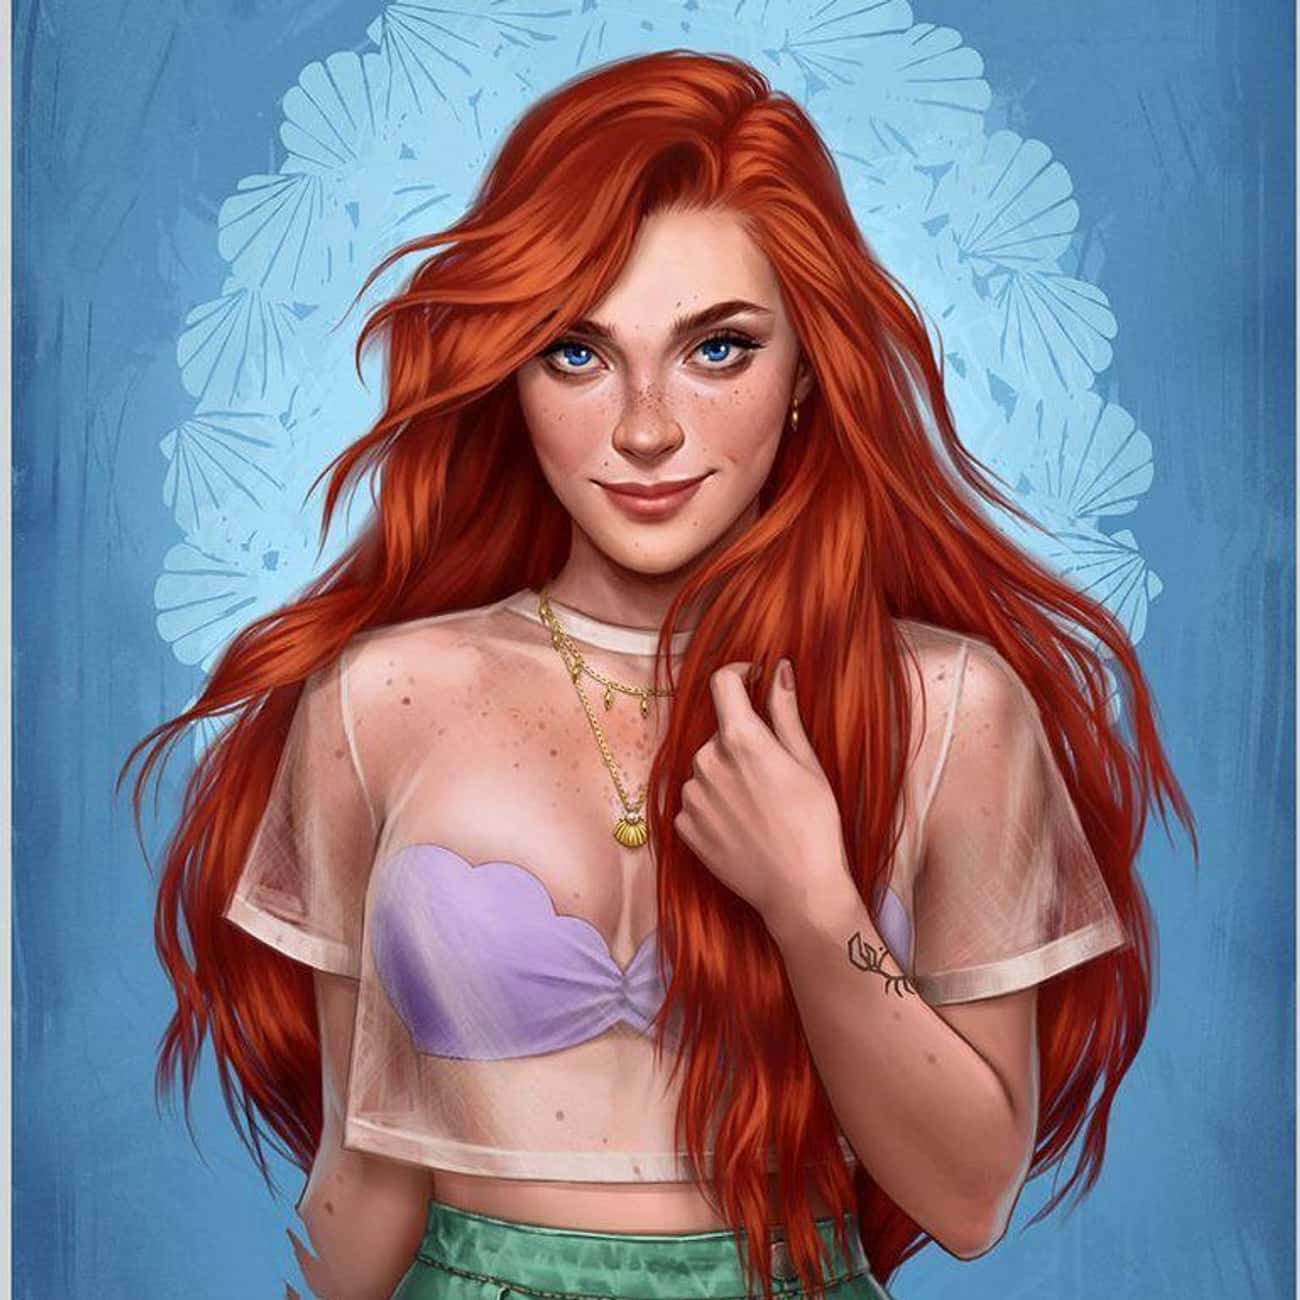 Ariel Makes Sheer Crops and Bustier Tops Work